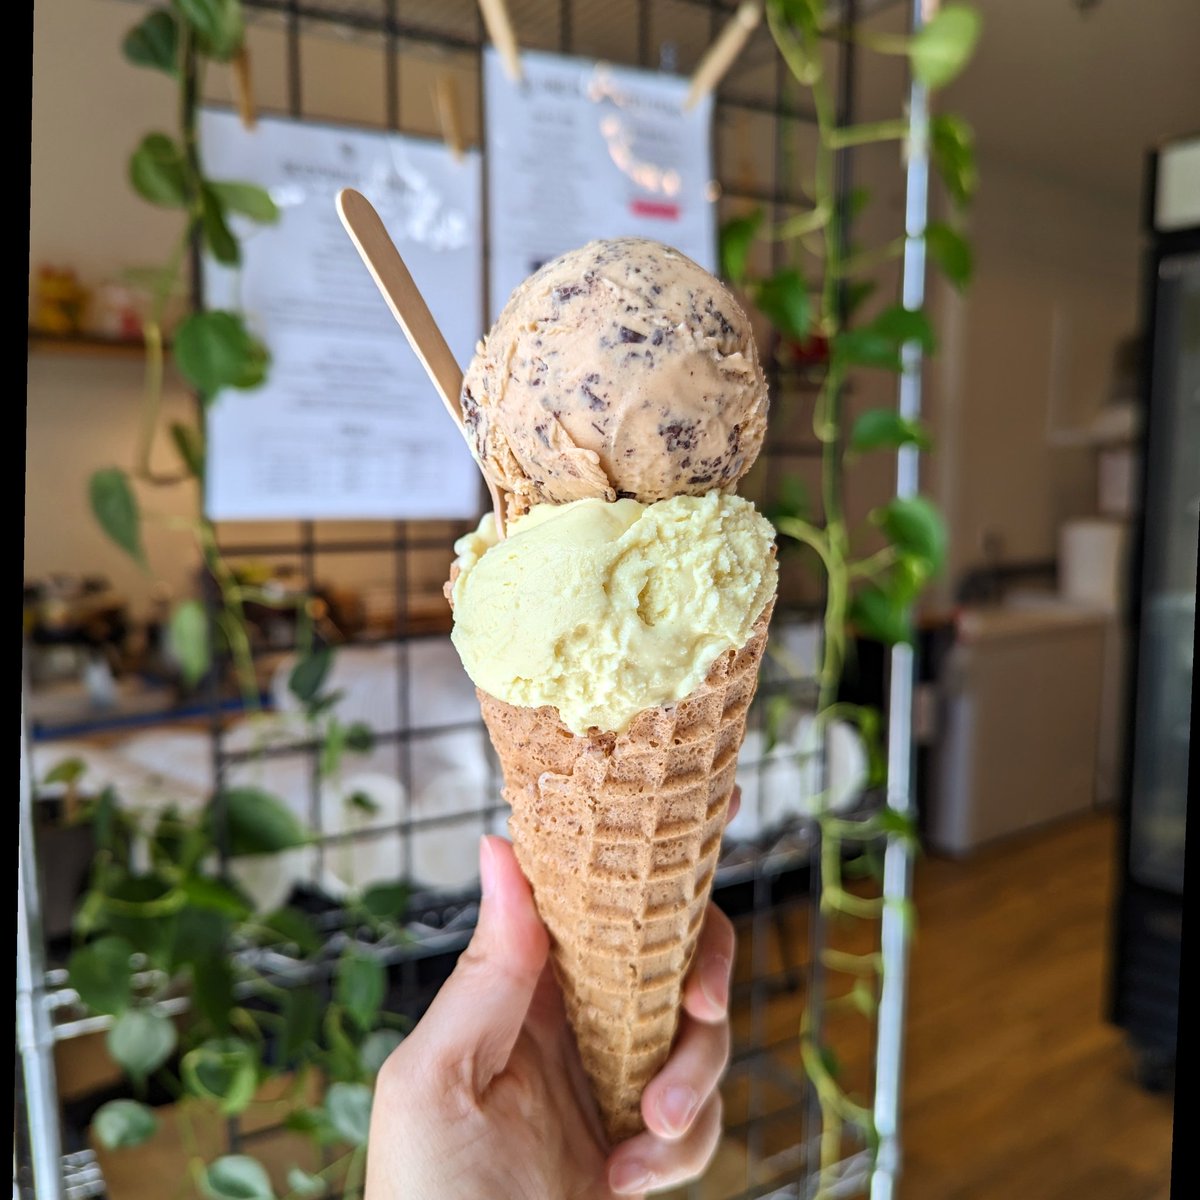 New month, new flavours There's a short period of time where thet overlap and you can get epic combos like this: April's Friendchip Goals and May's Korean Banana Milk. If you wanna grab this, come quick! May flavours are rolling in fast.